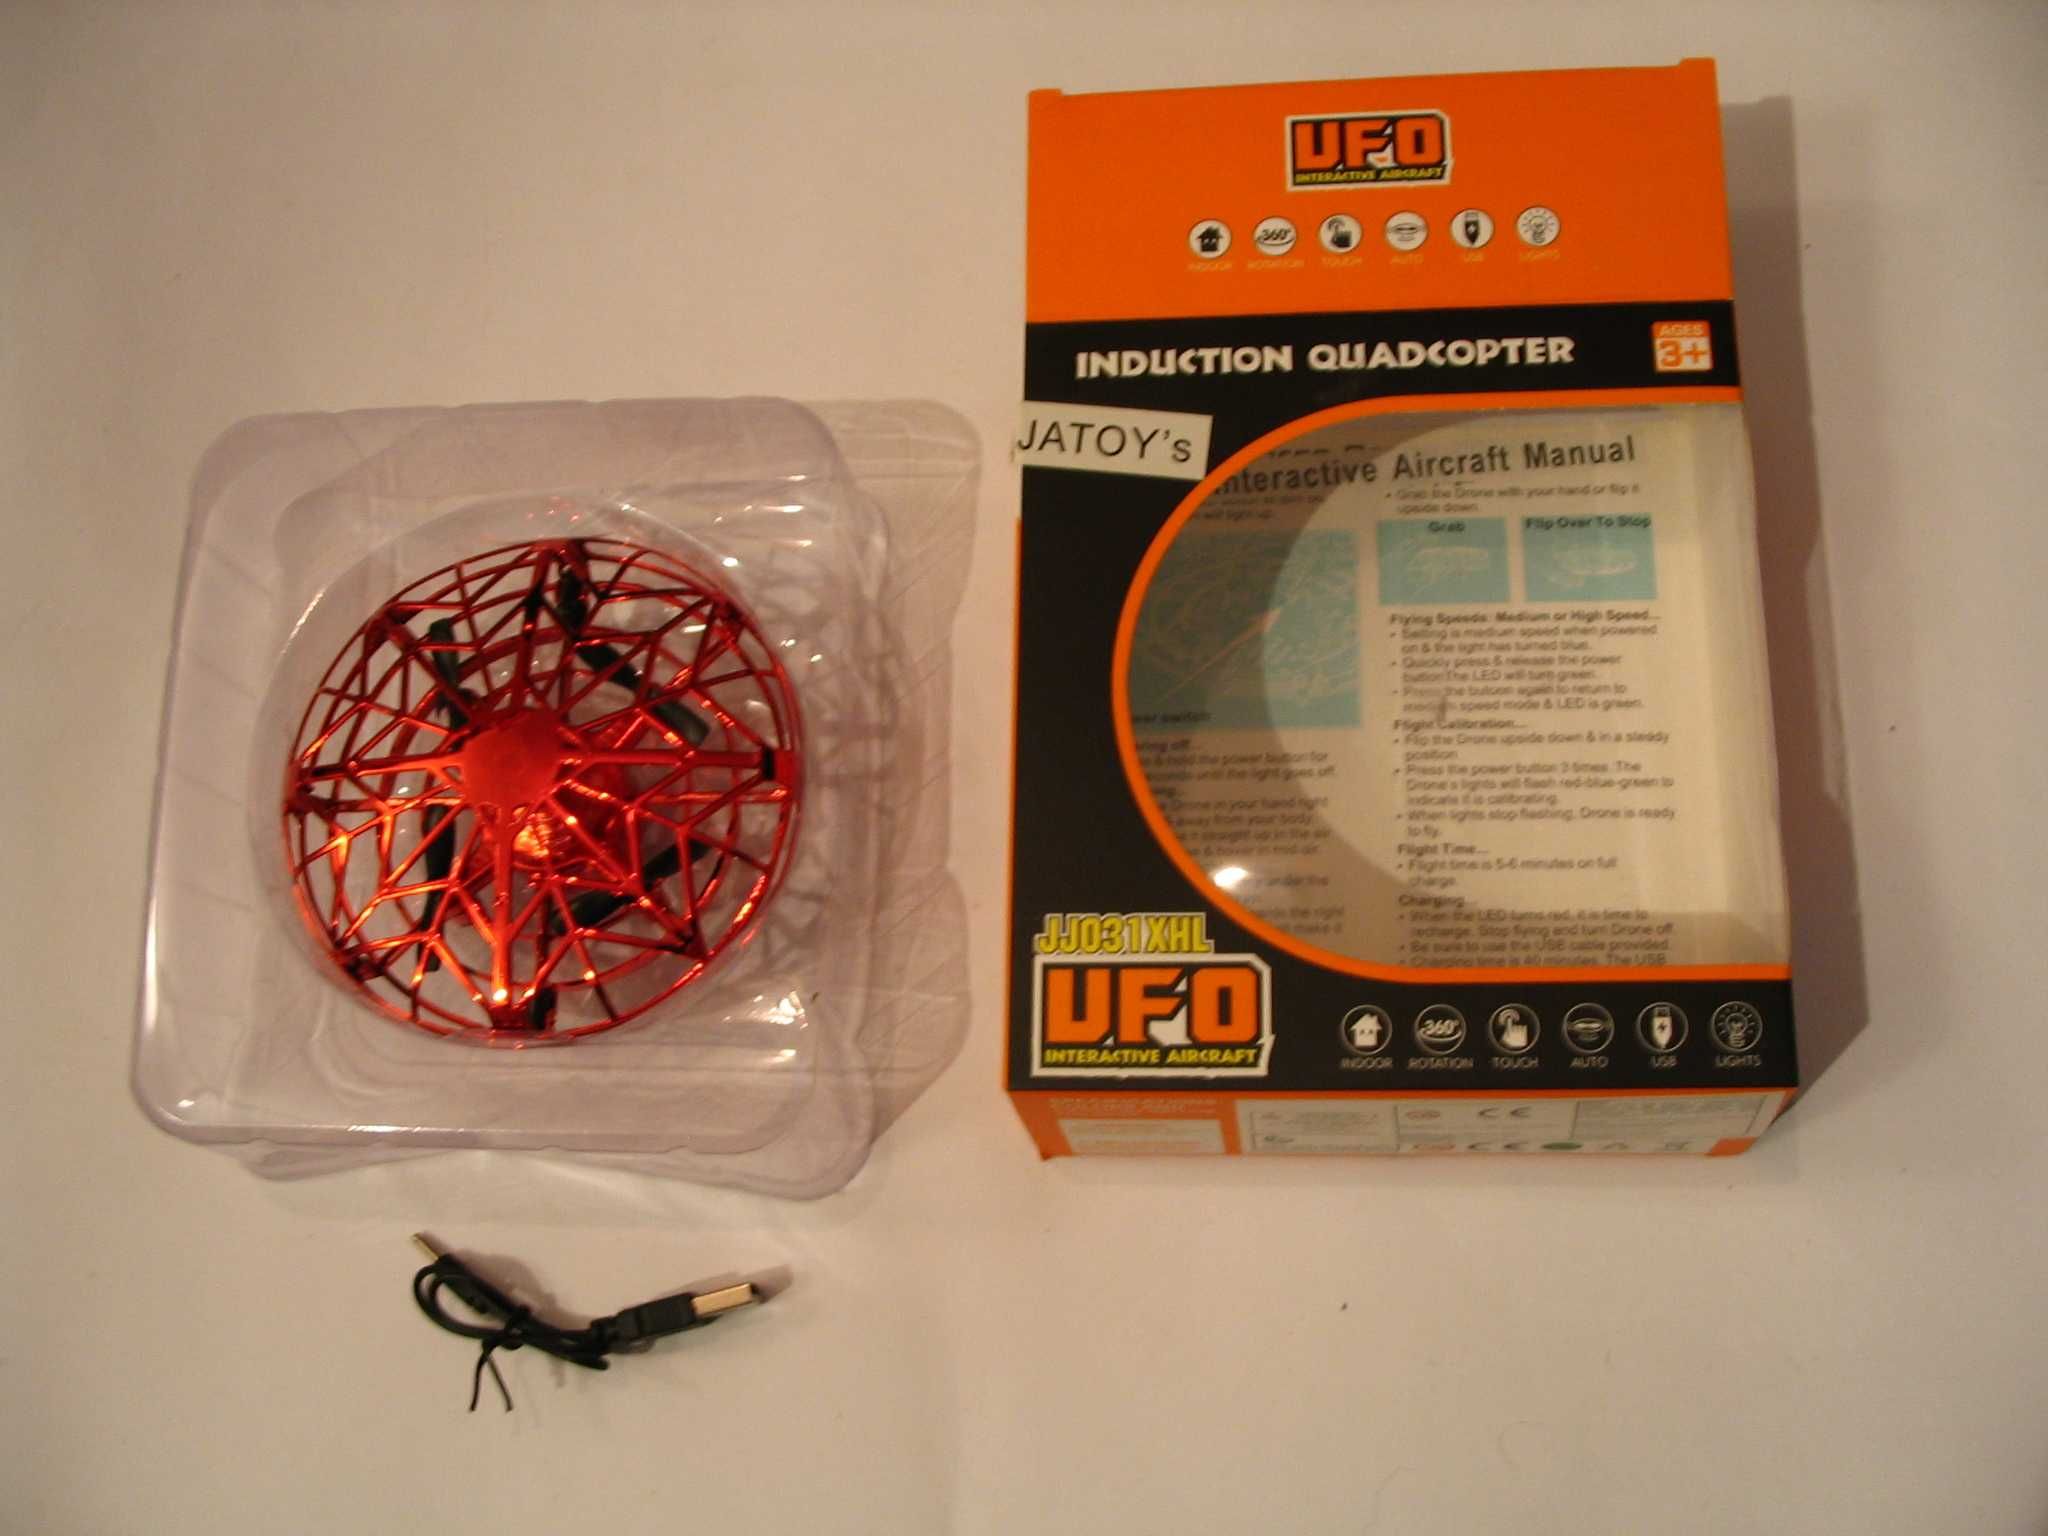 Induction Quadcopter Ufo